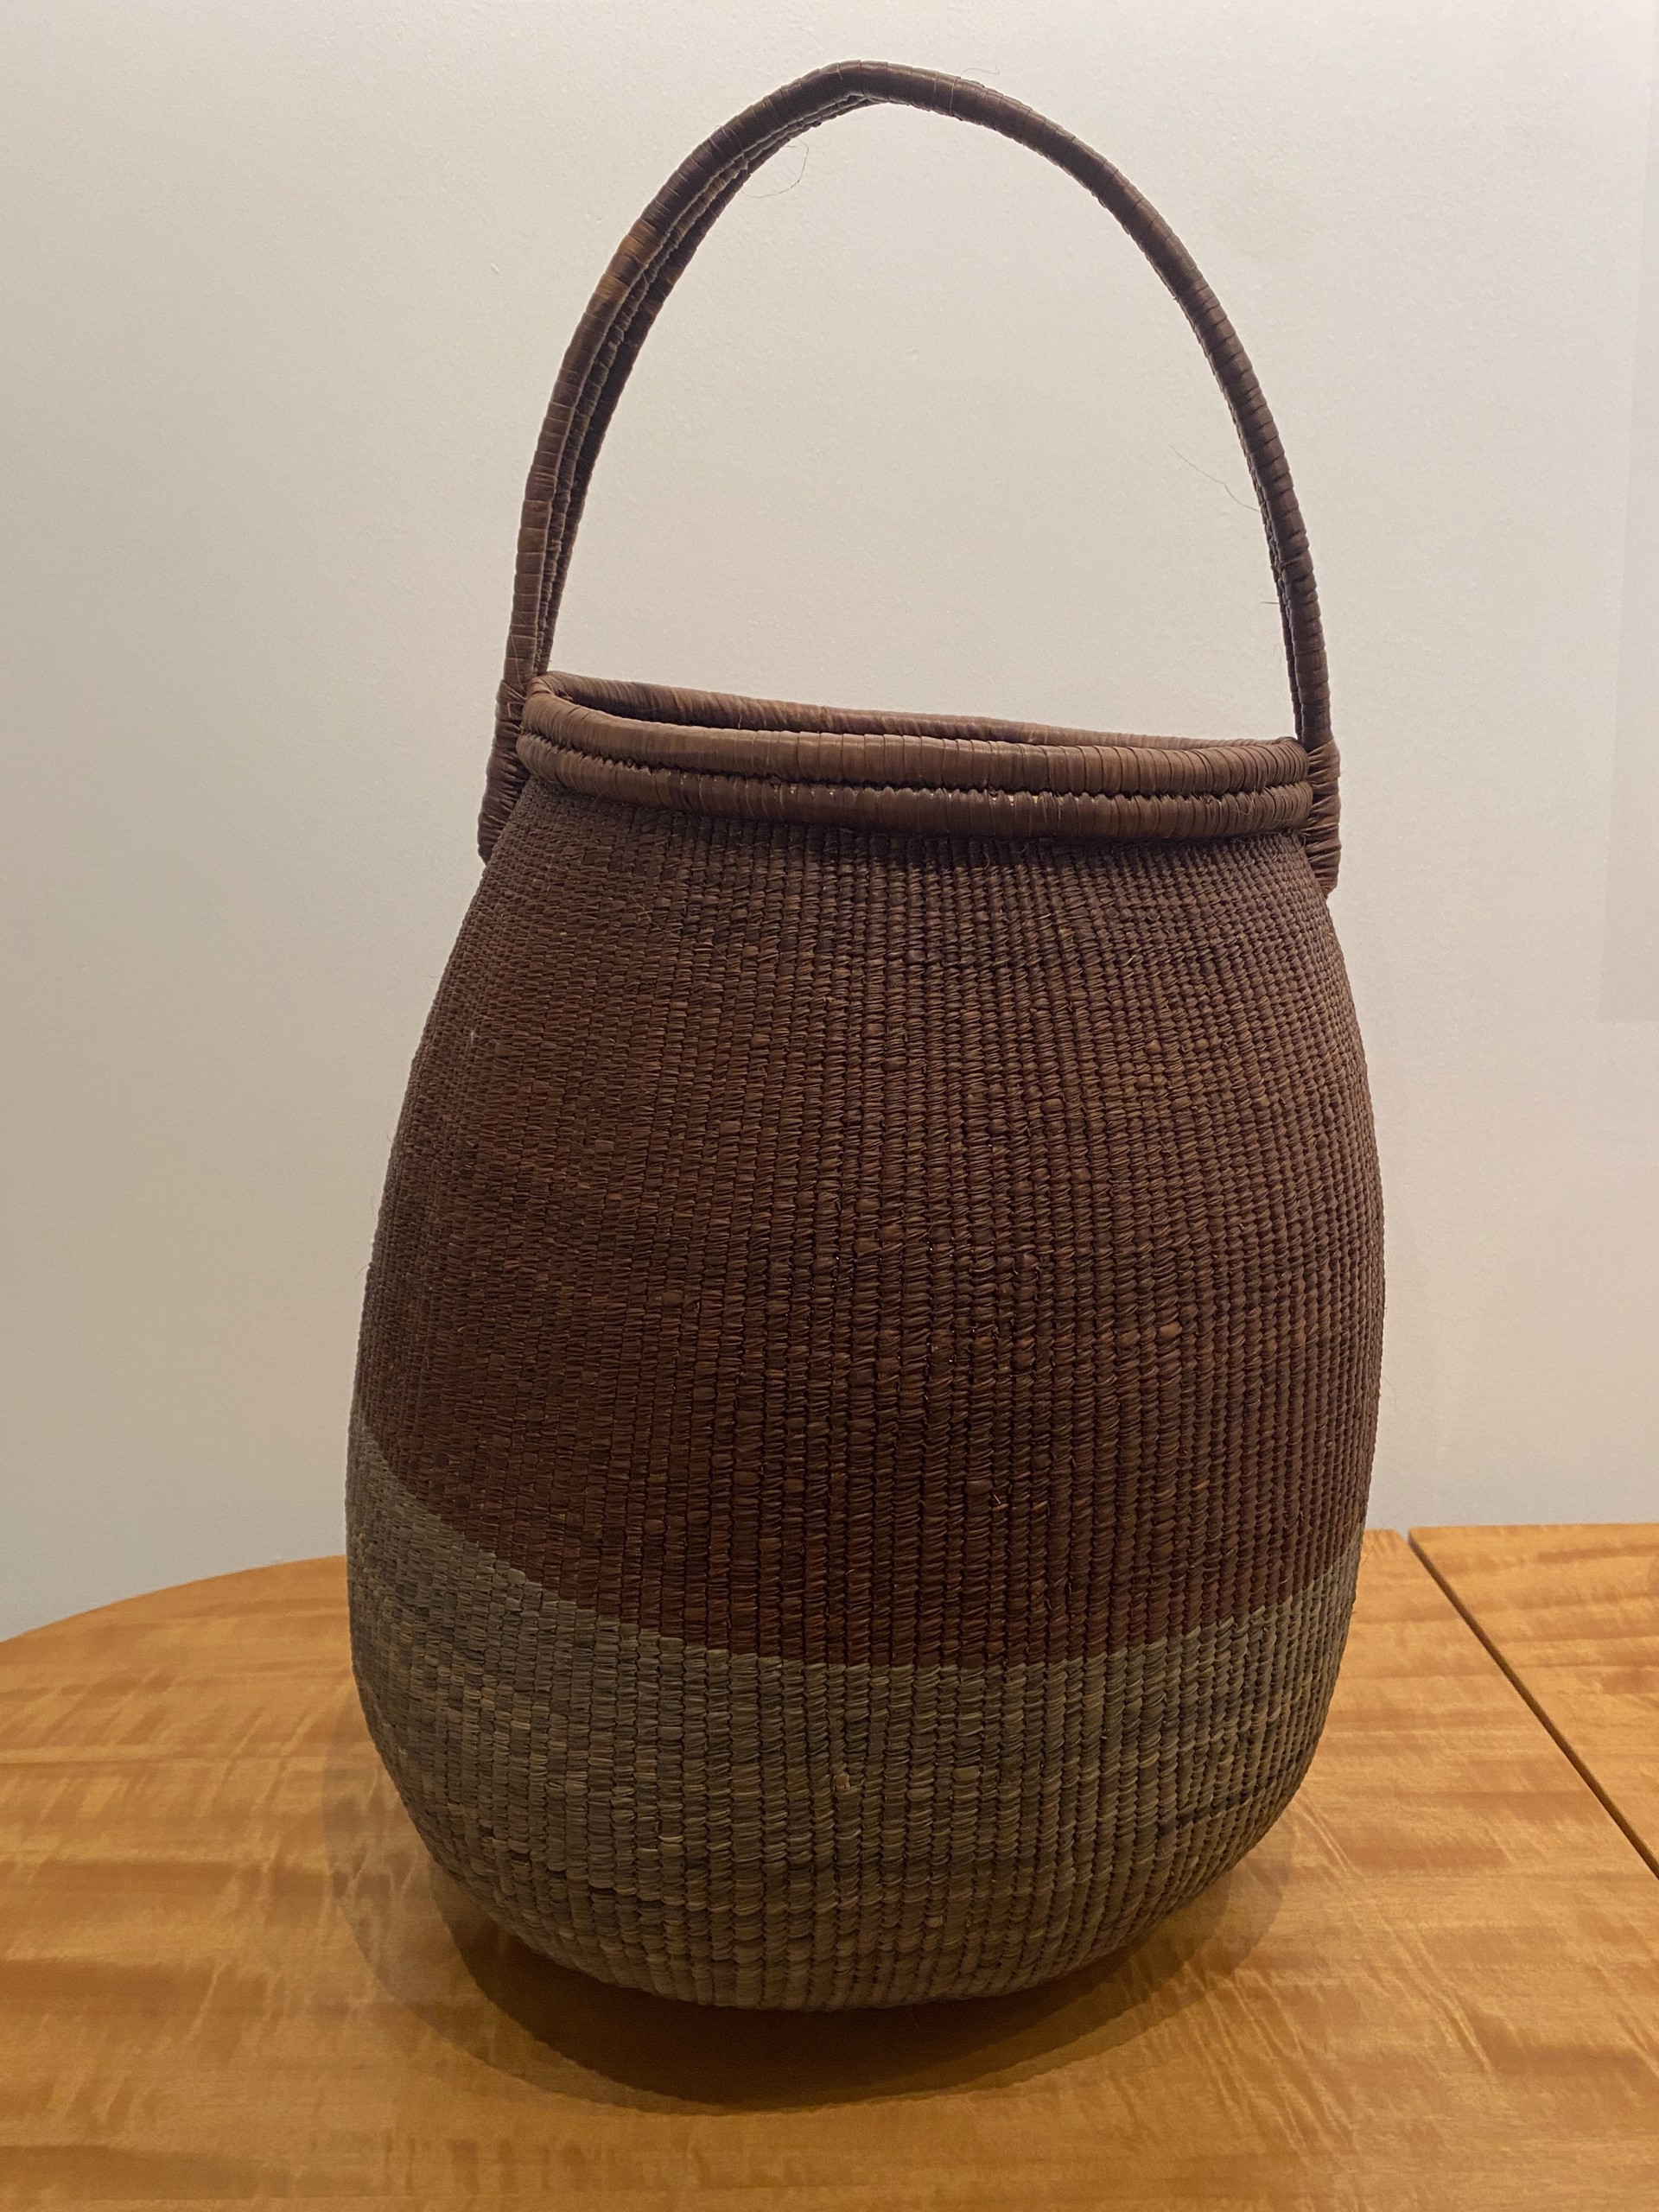 Khwe Collecting Basket by Omba Arts